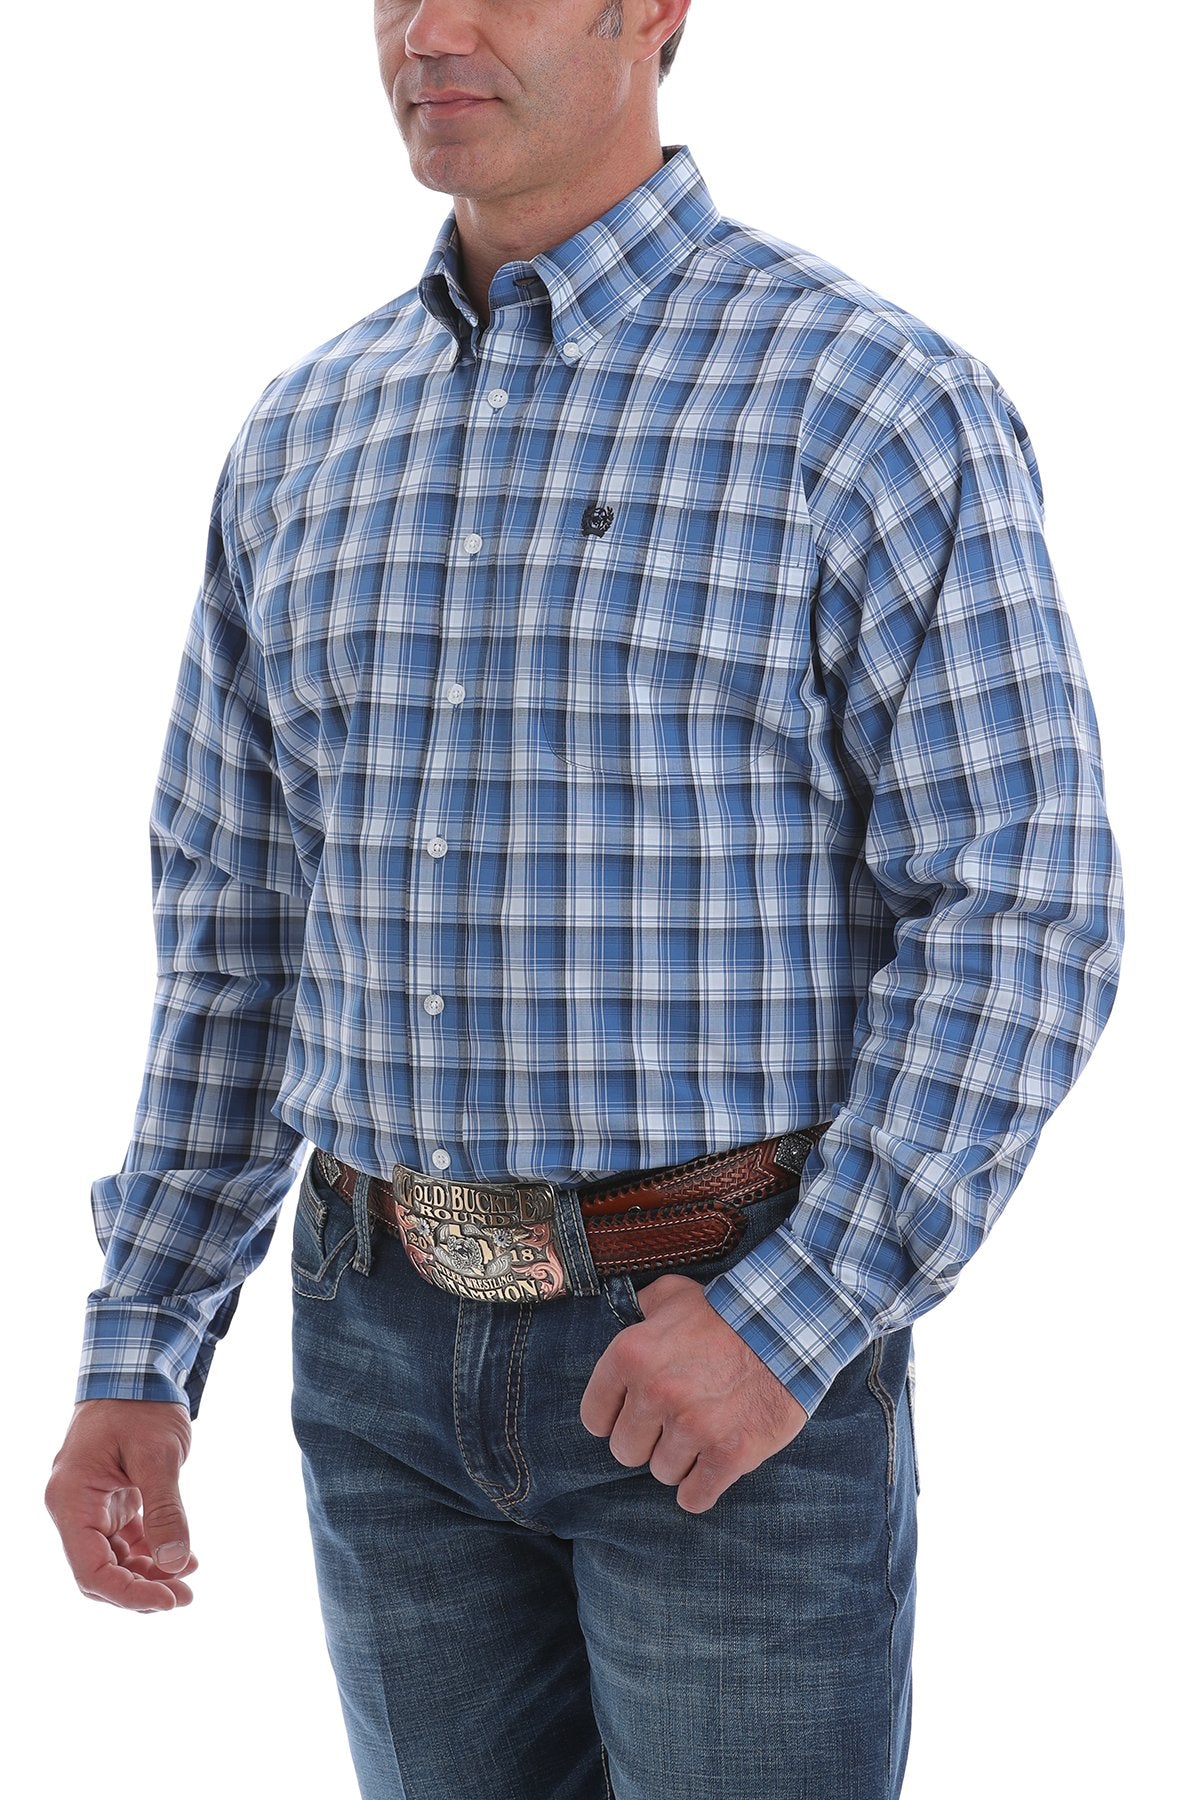 Cinch Mens Light Blue, Navy and White Plaid L/S Shirt - MTW1105088 - On Sale